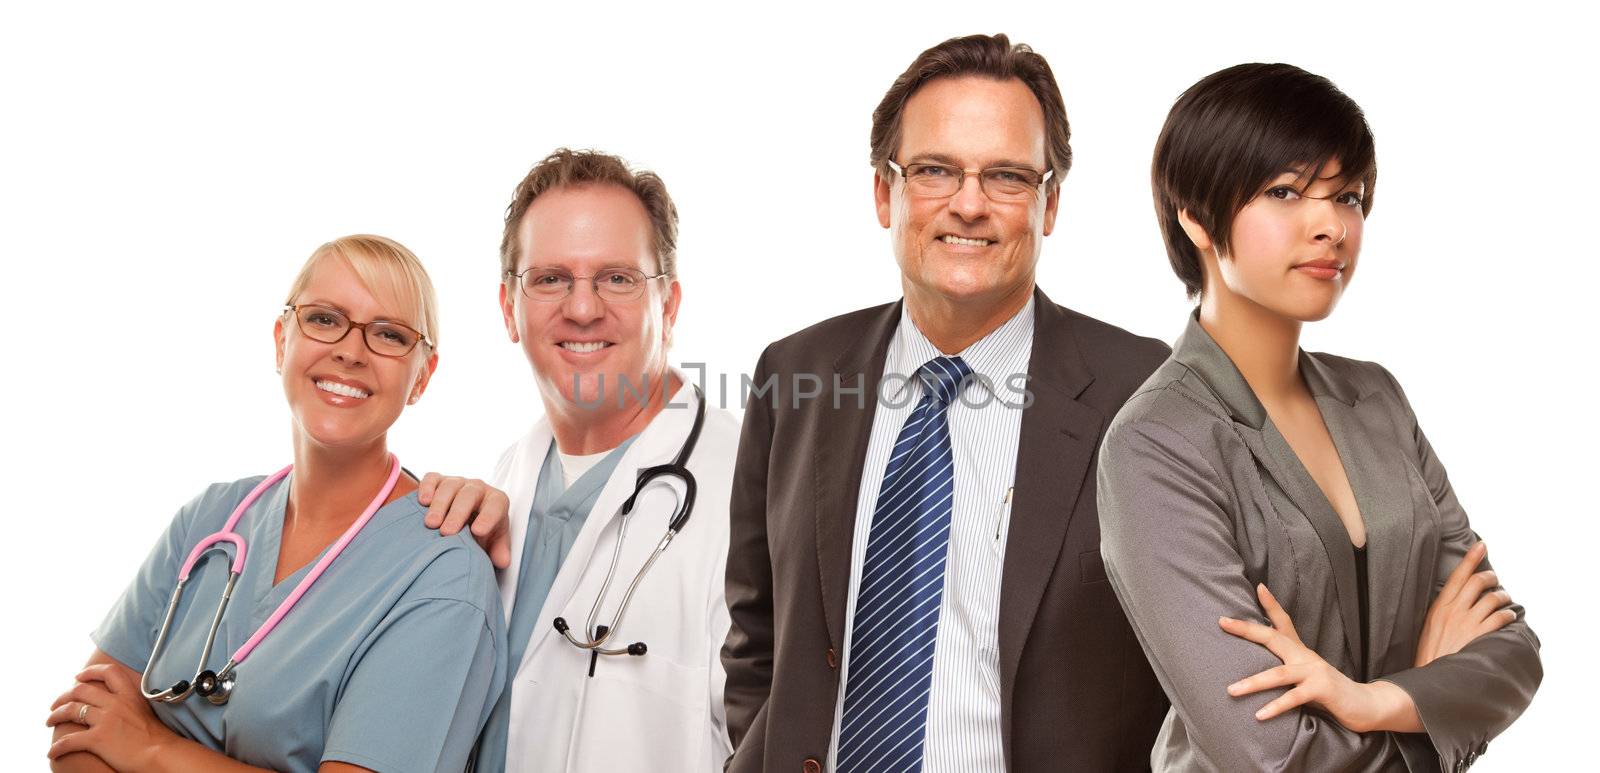 Mixed Race Women and Businessman with Doctors or Nurses by Feverpitched